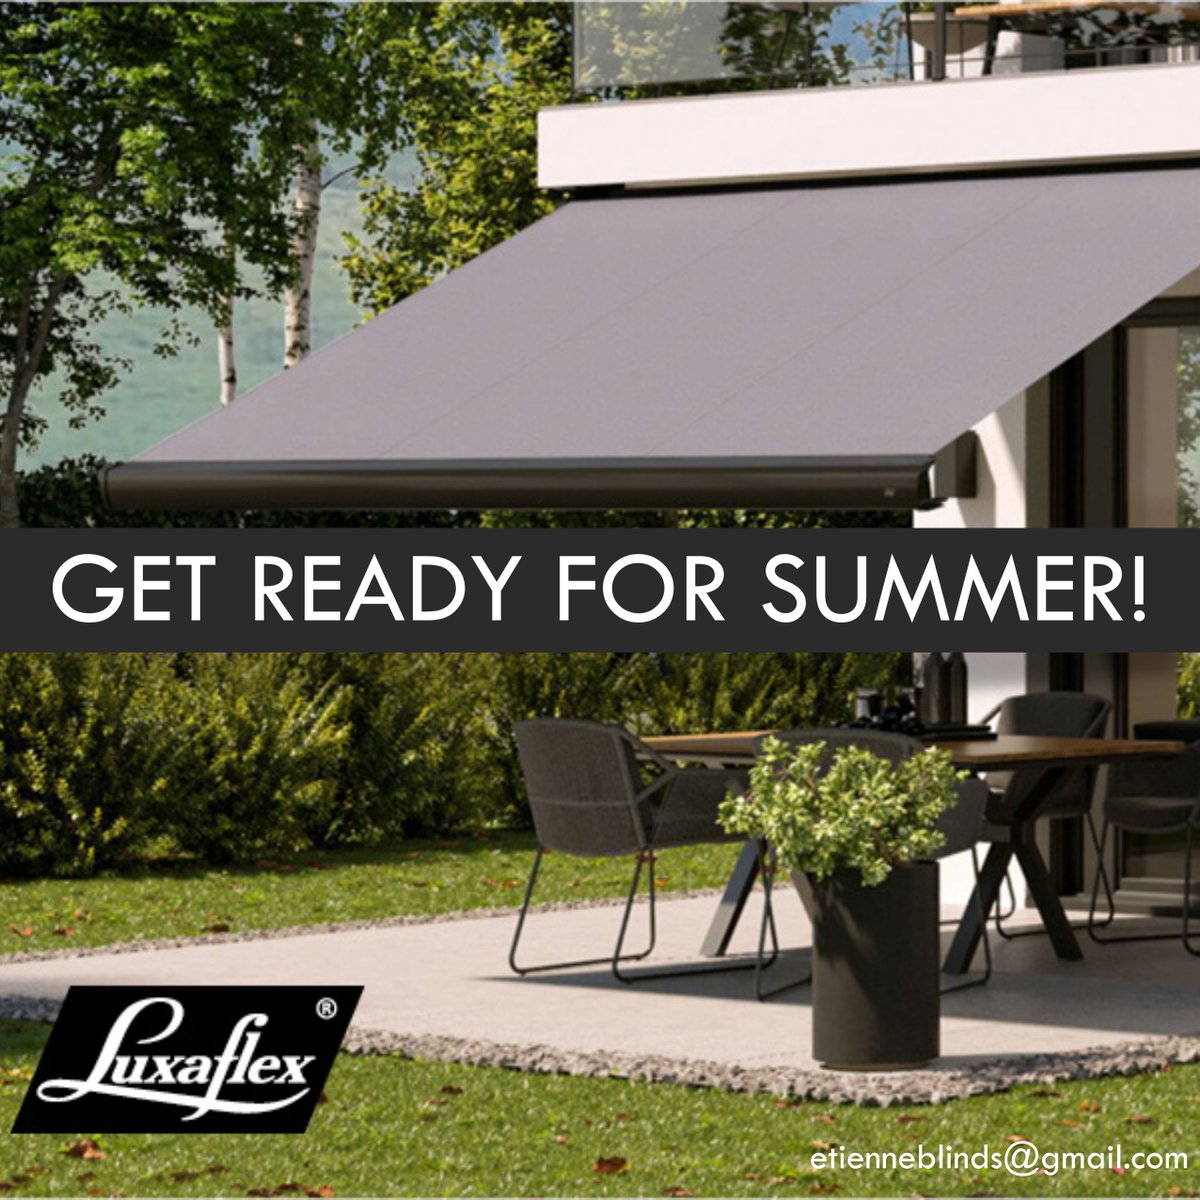 Are you ready for summer?  ☀️

From awnings to new blinds, we've got you covered with the range from Luxaflex  🌟

Get in touch to find out more!
✉️ etienneblinds@gmail.com

#Buxton #HighPeak #Chesterfield #LuxaflexUK #Luxaflex #PowerView